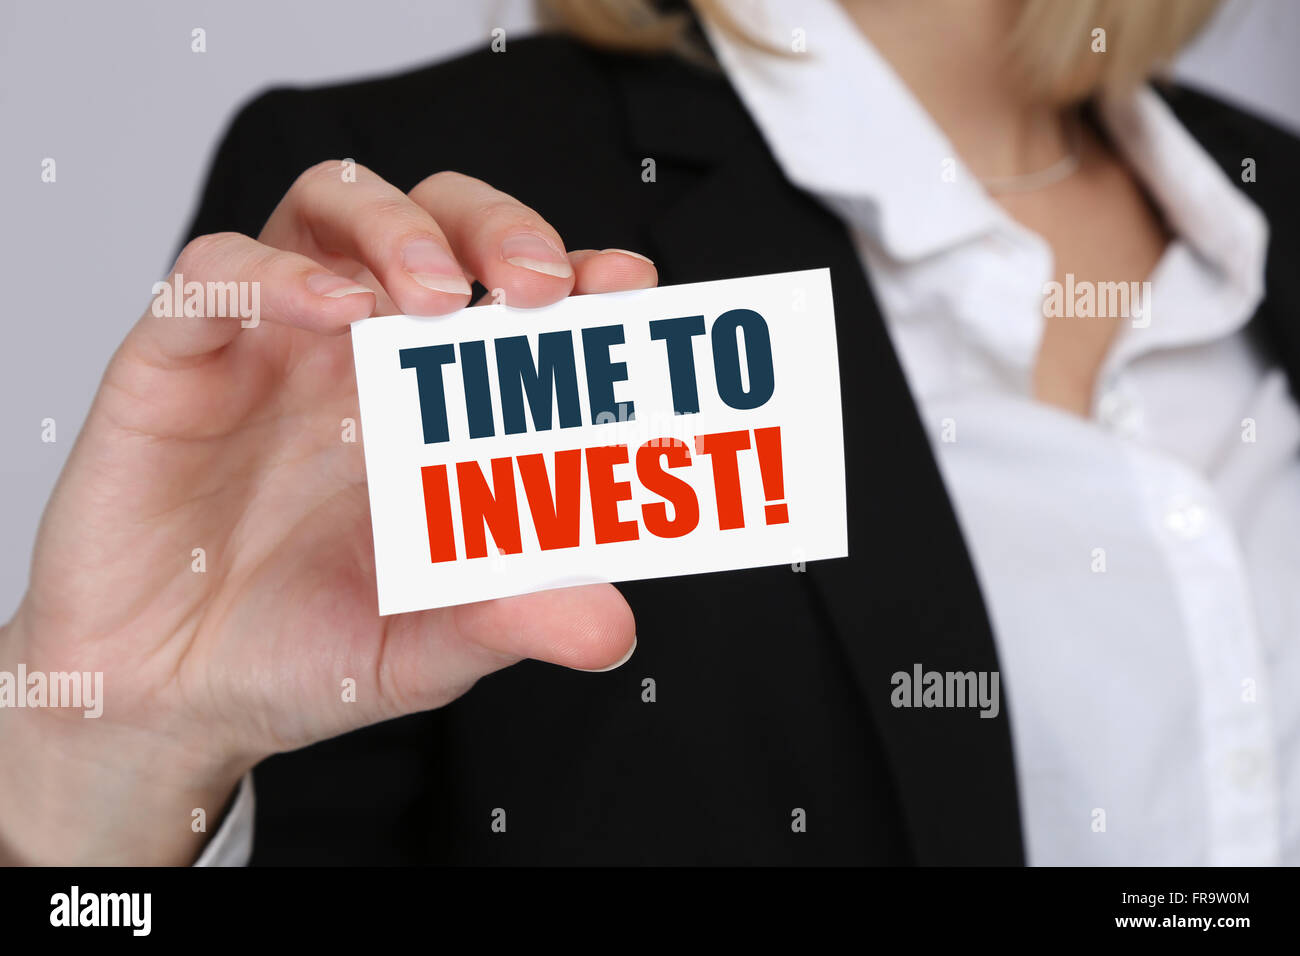 Invest investment investor finance financial finances money business concept banking Stock Photo